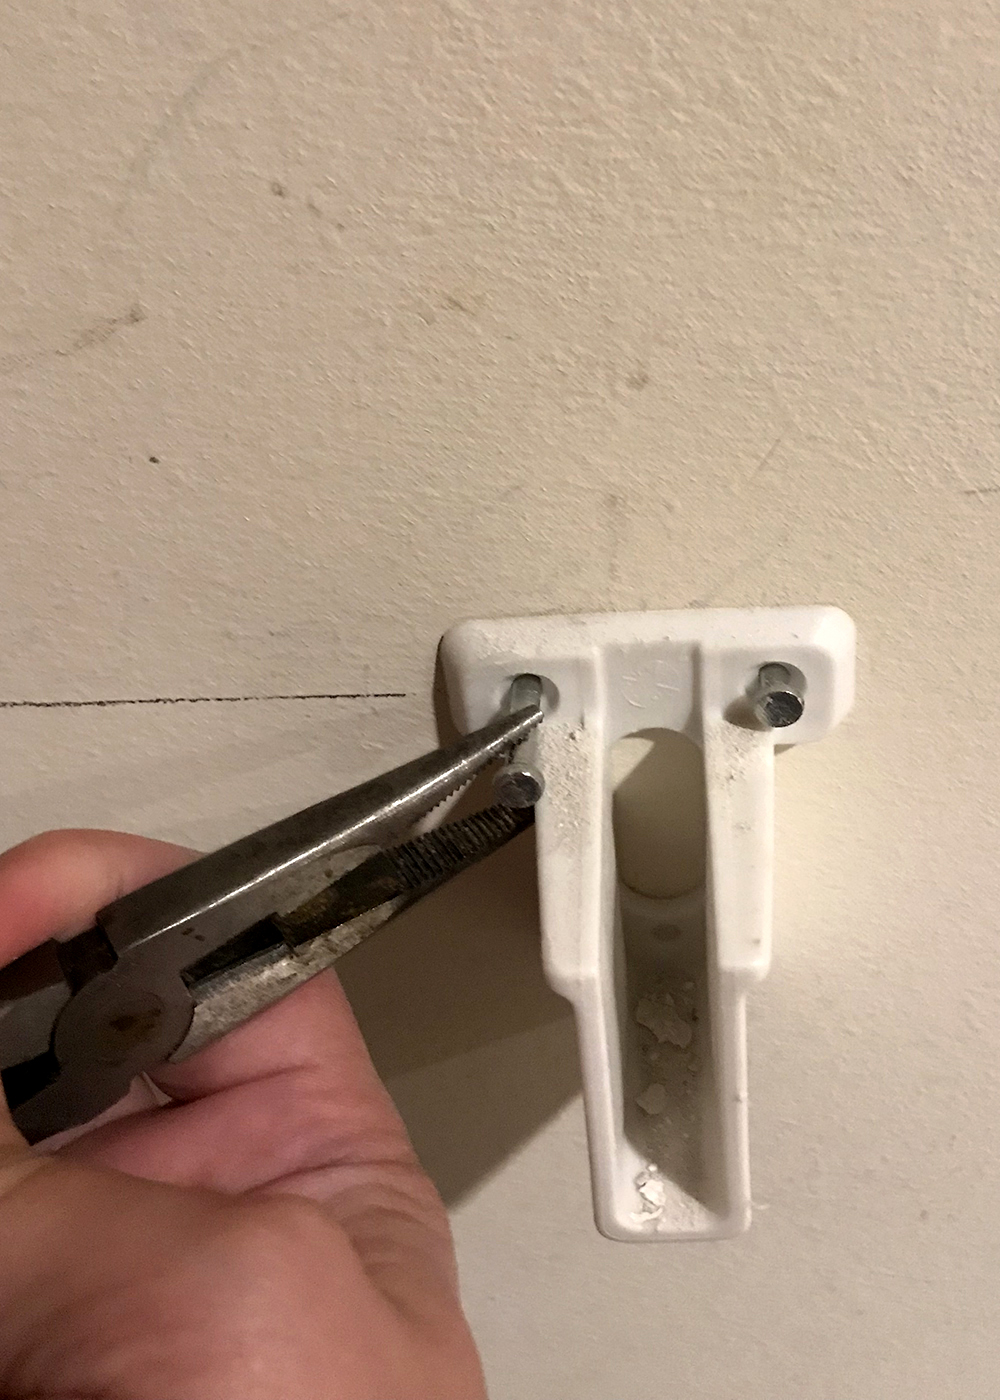 pliers work well in removing pins without damaging wall